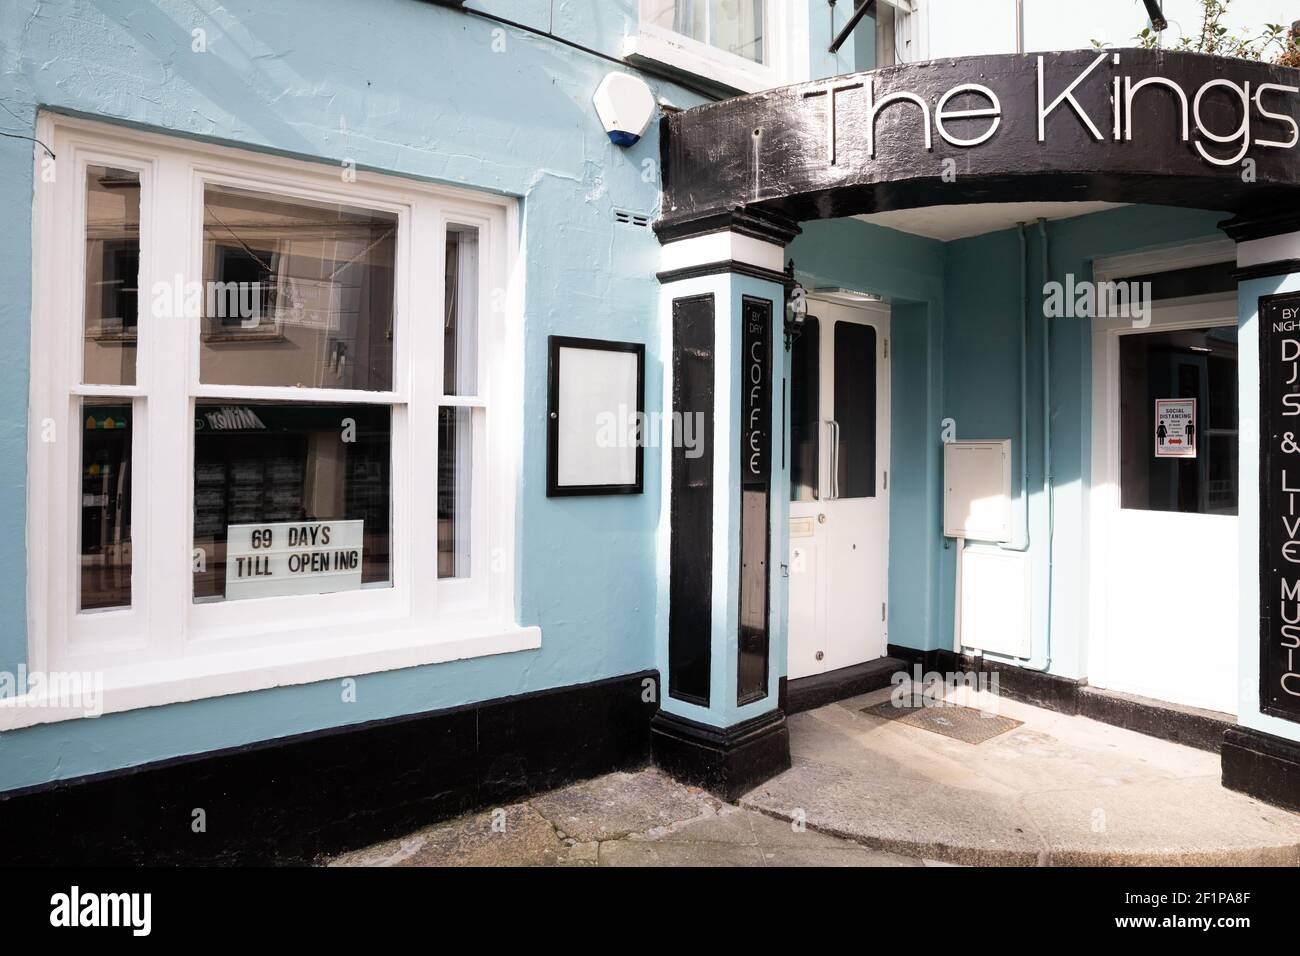 Falmouth,Cornwall,UK,9th March 2021,Deserted Falmouth during Lockdown. The Kings Bar has a sign in the window counting down 69 days till re opening .Credit Keith Larby/Alamy Live News Stock Photo